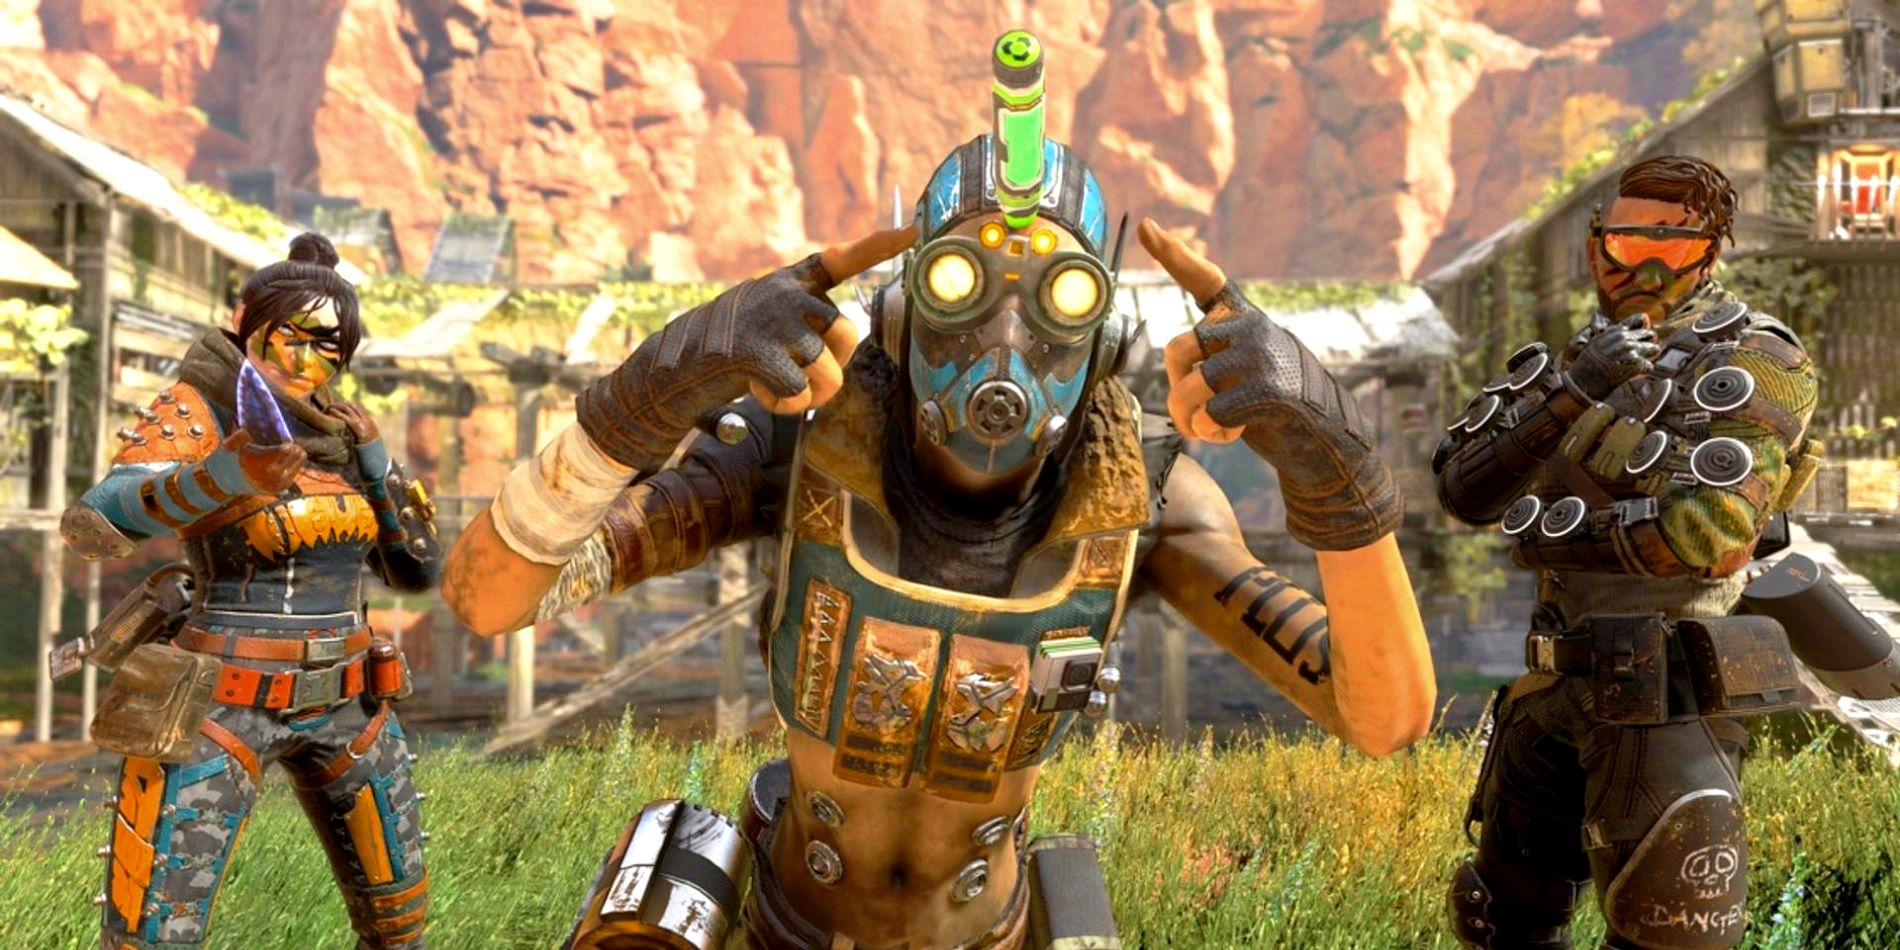 Three Apex Legends characters posing - Wraith, Octane and Mirage.